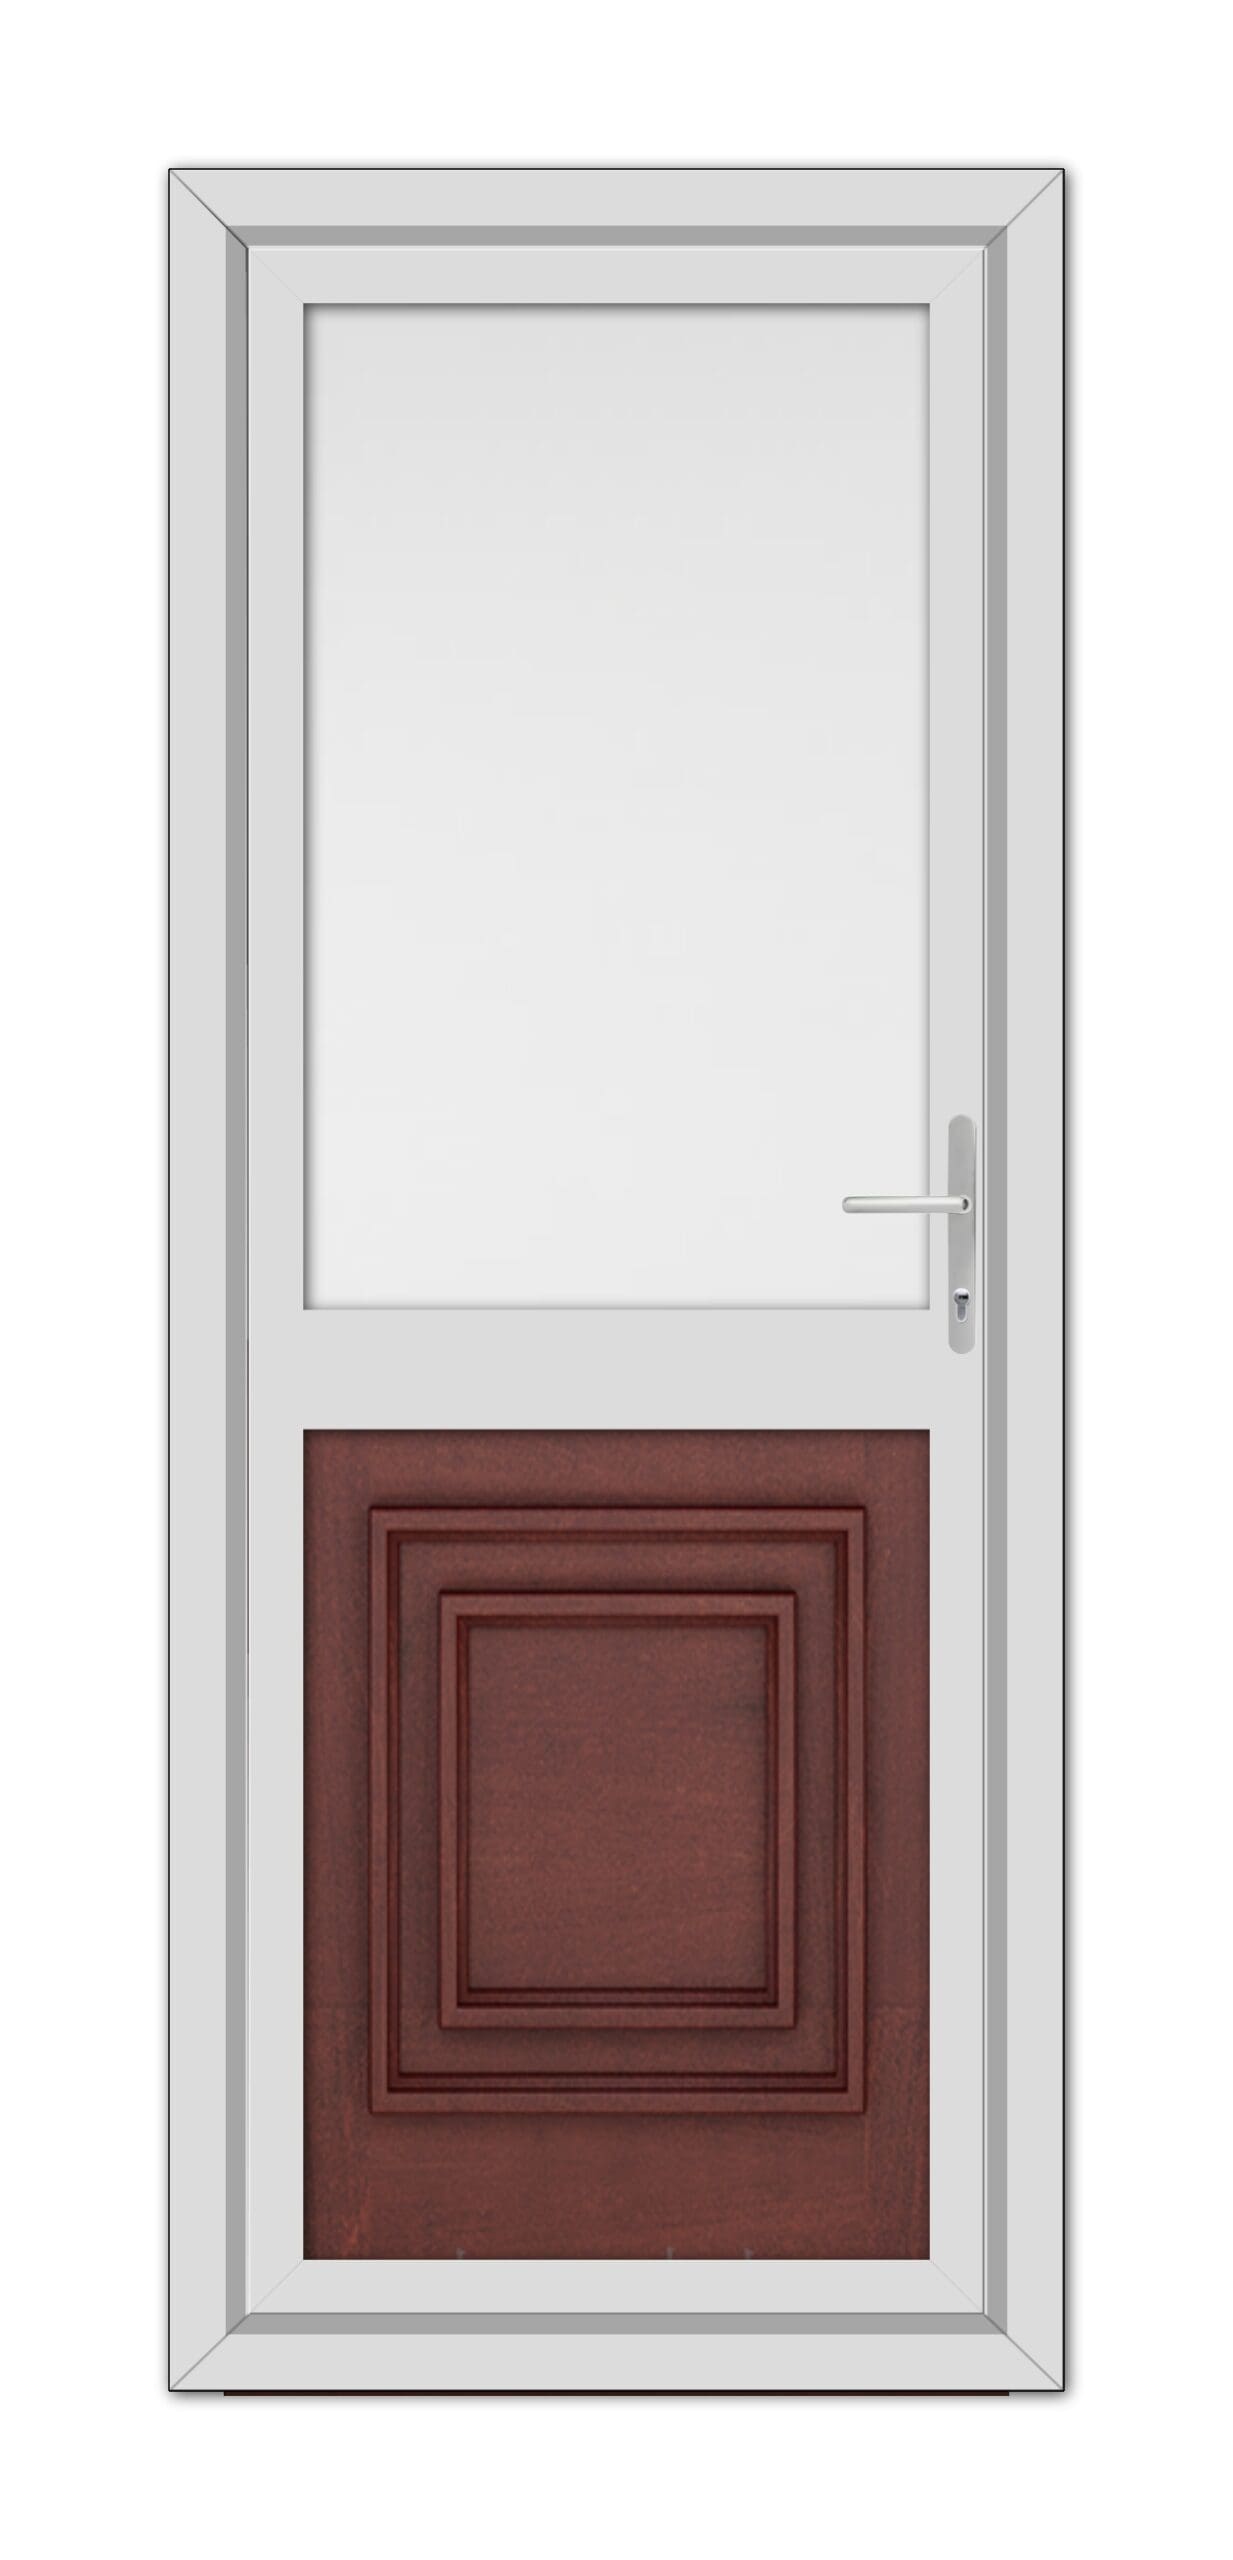 A Mahogan Hannover Half uPVC Back Door with a white frame, featuring a large upper window and a lower red panel with a recessed square design, equipped with a metallic handle on the right.